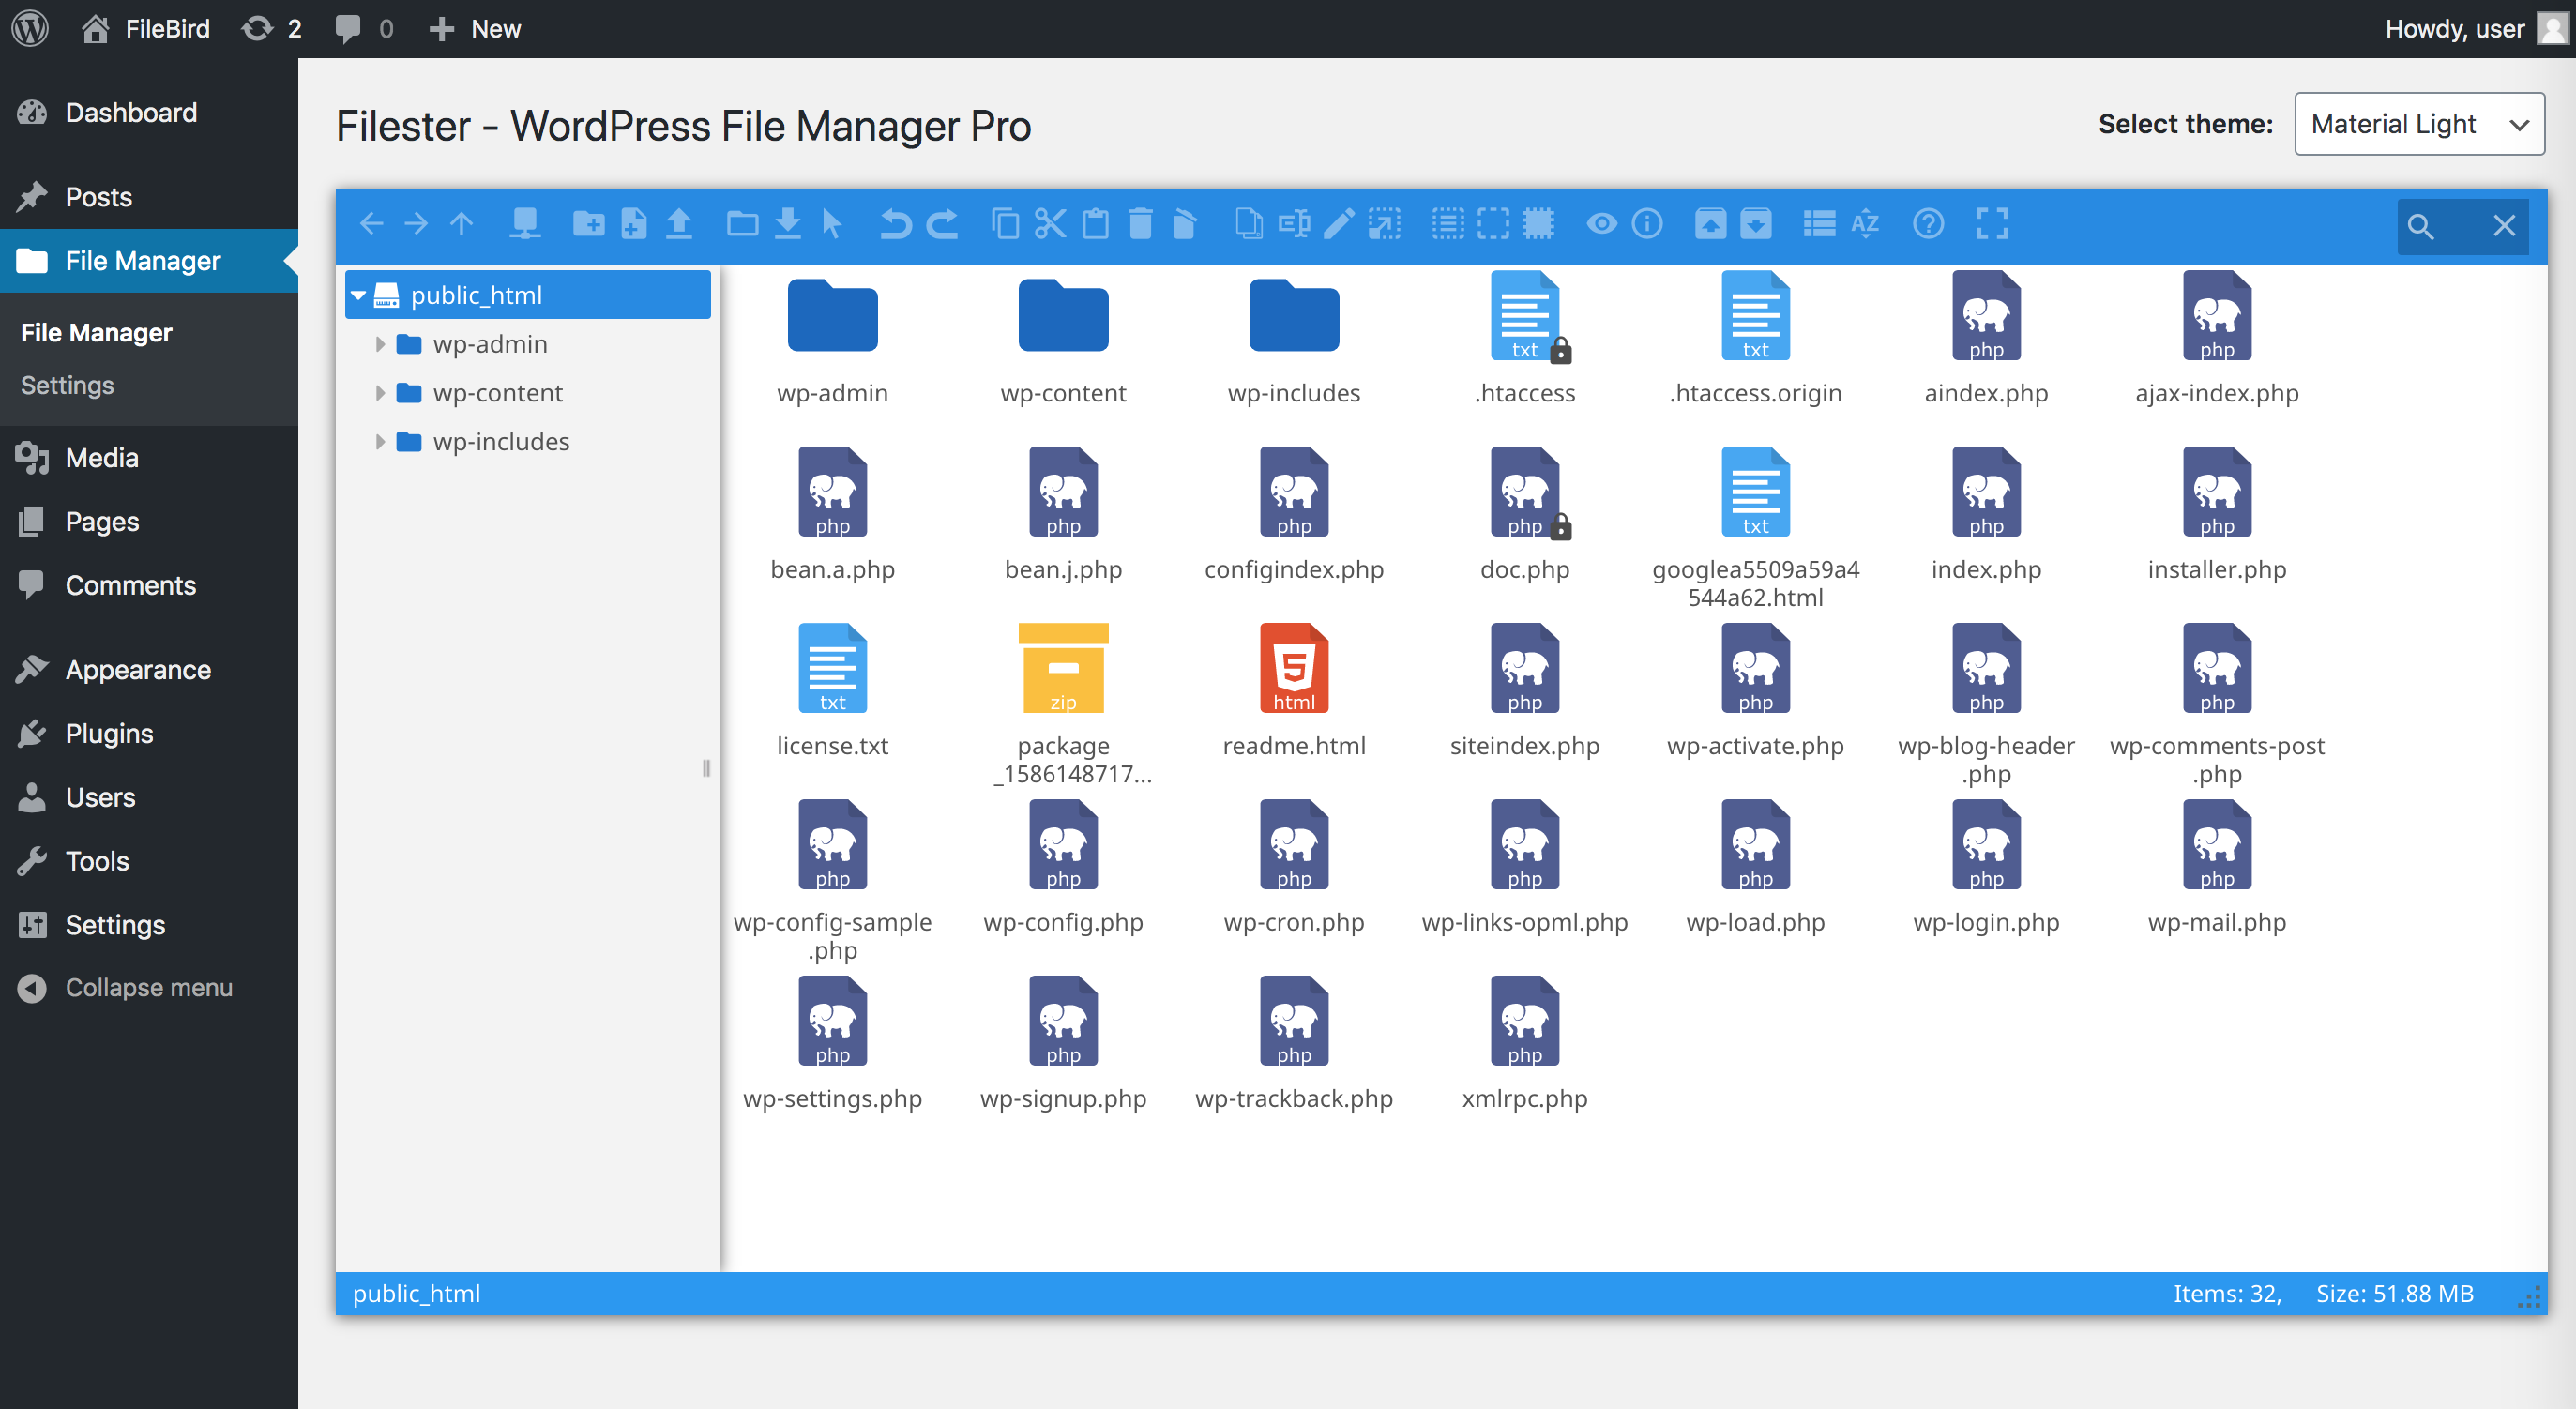 File manager UI theme